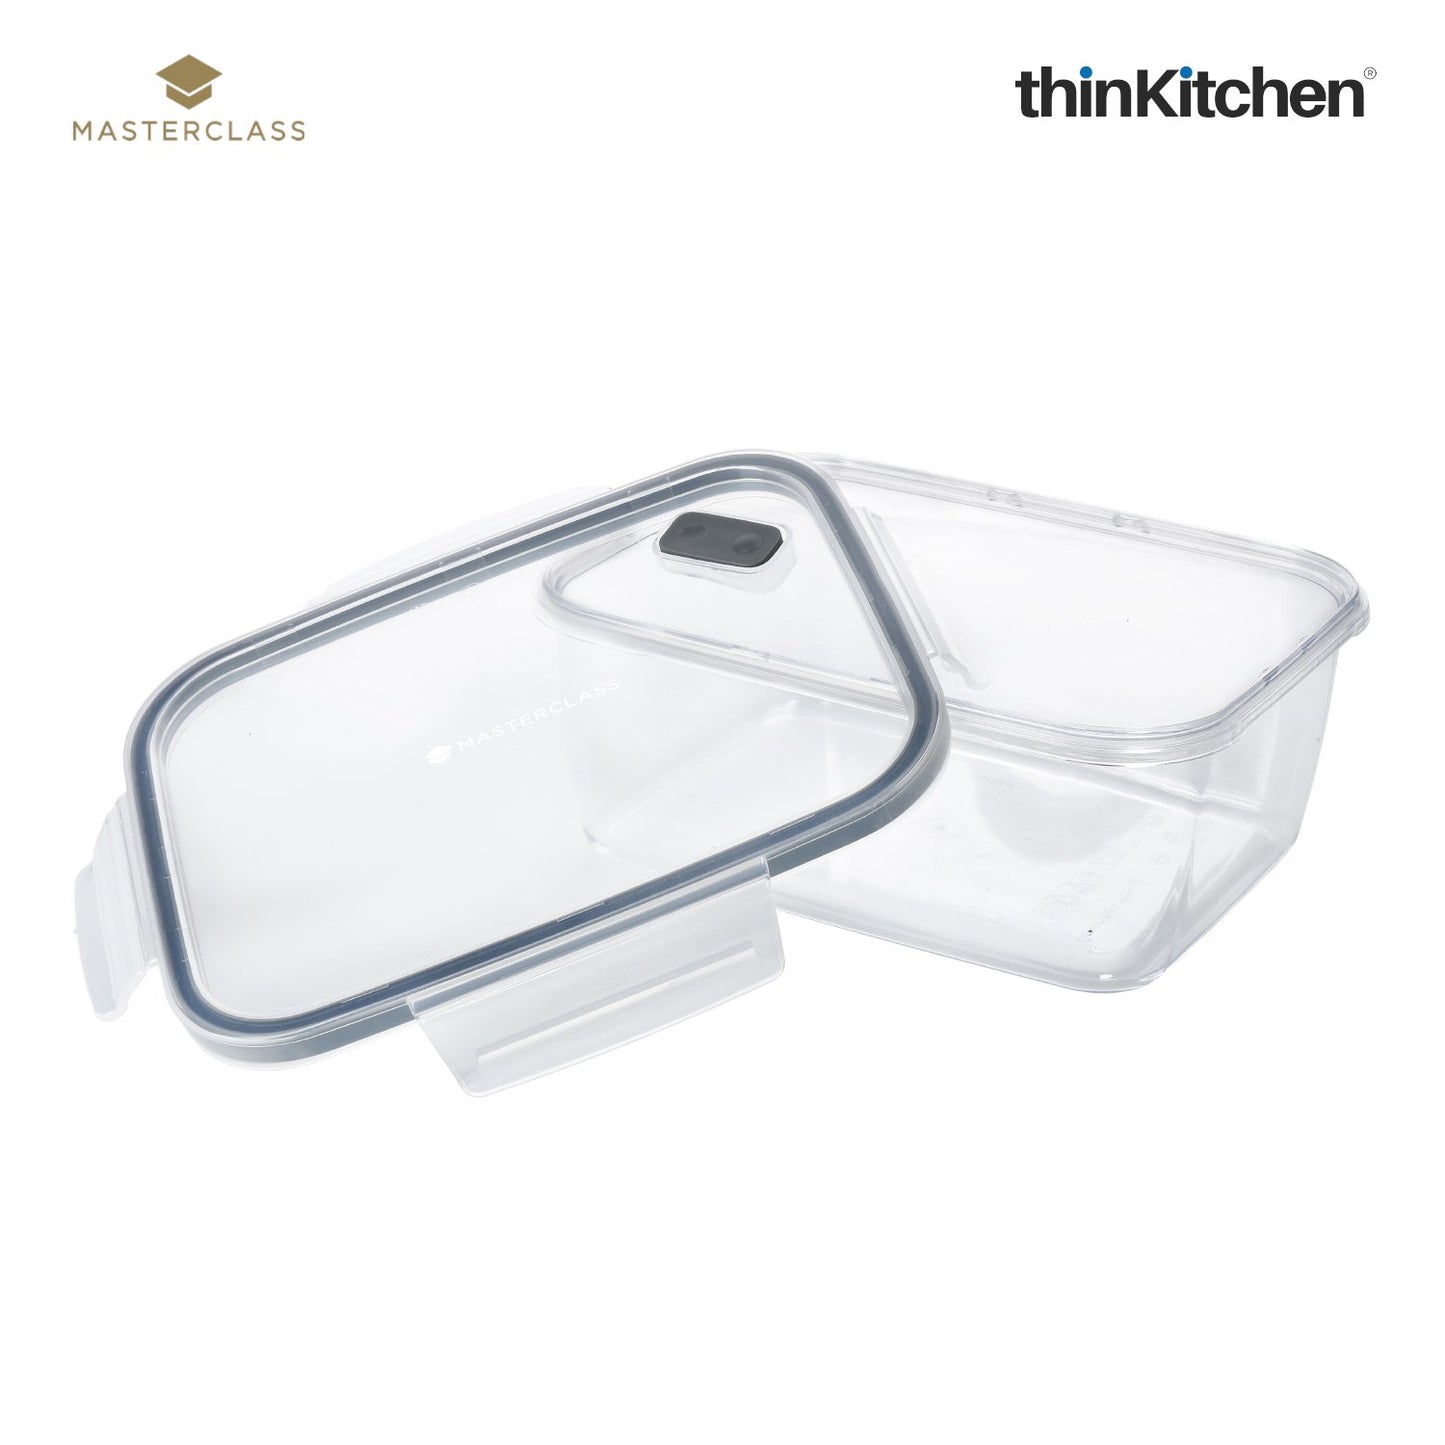 Masterclass Recycled Eco Snap Food Storage Container Rectangular 800ml